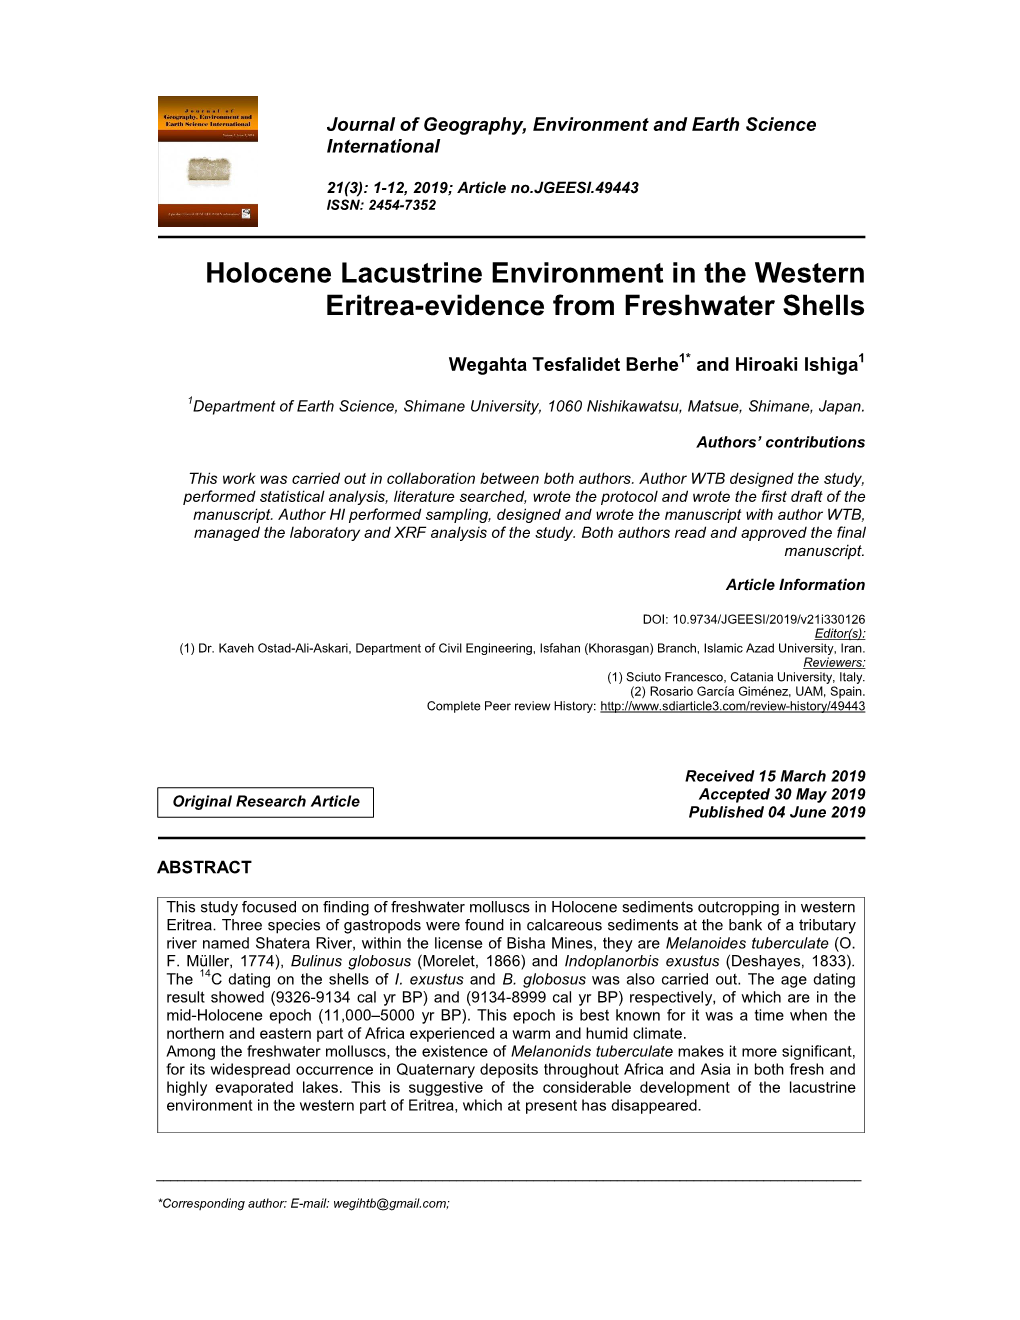 Holocene Lacustrine Environment in the Western Eritrea-Evidence from Freshwater Shells